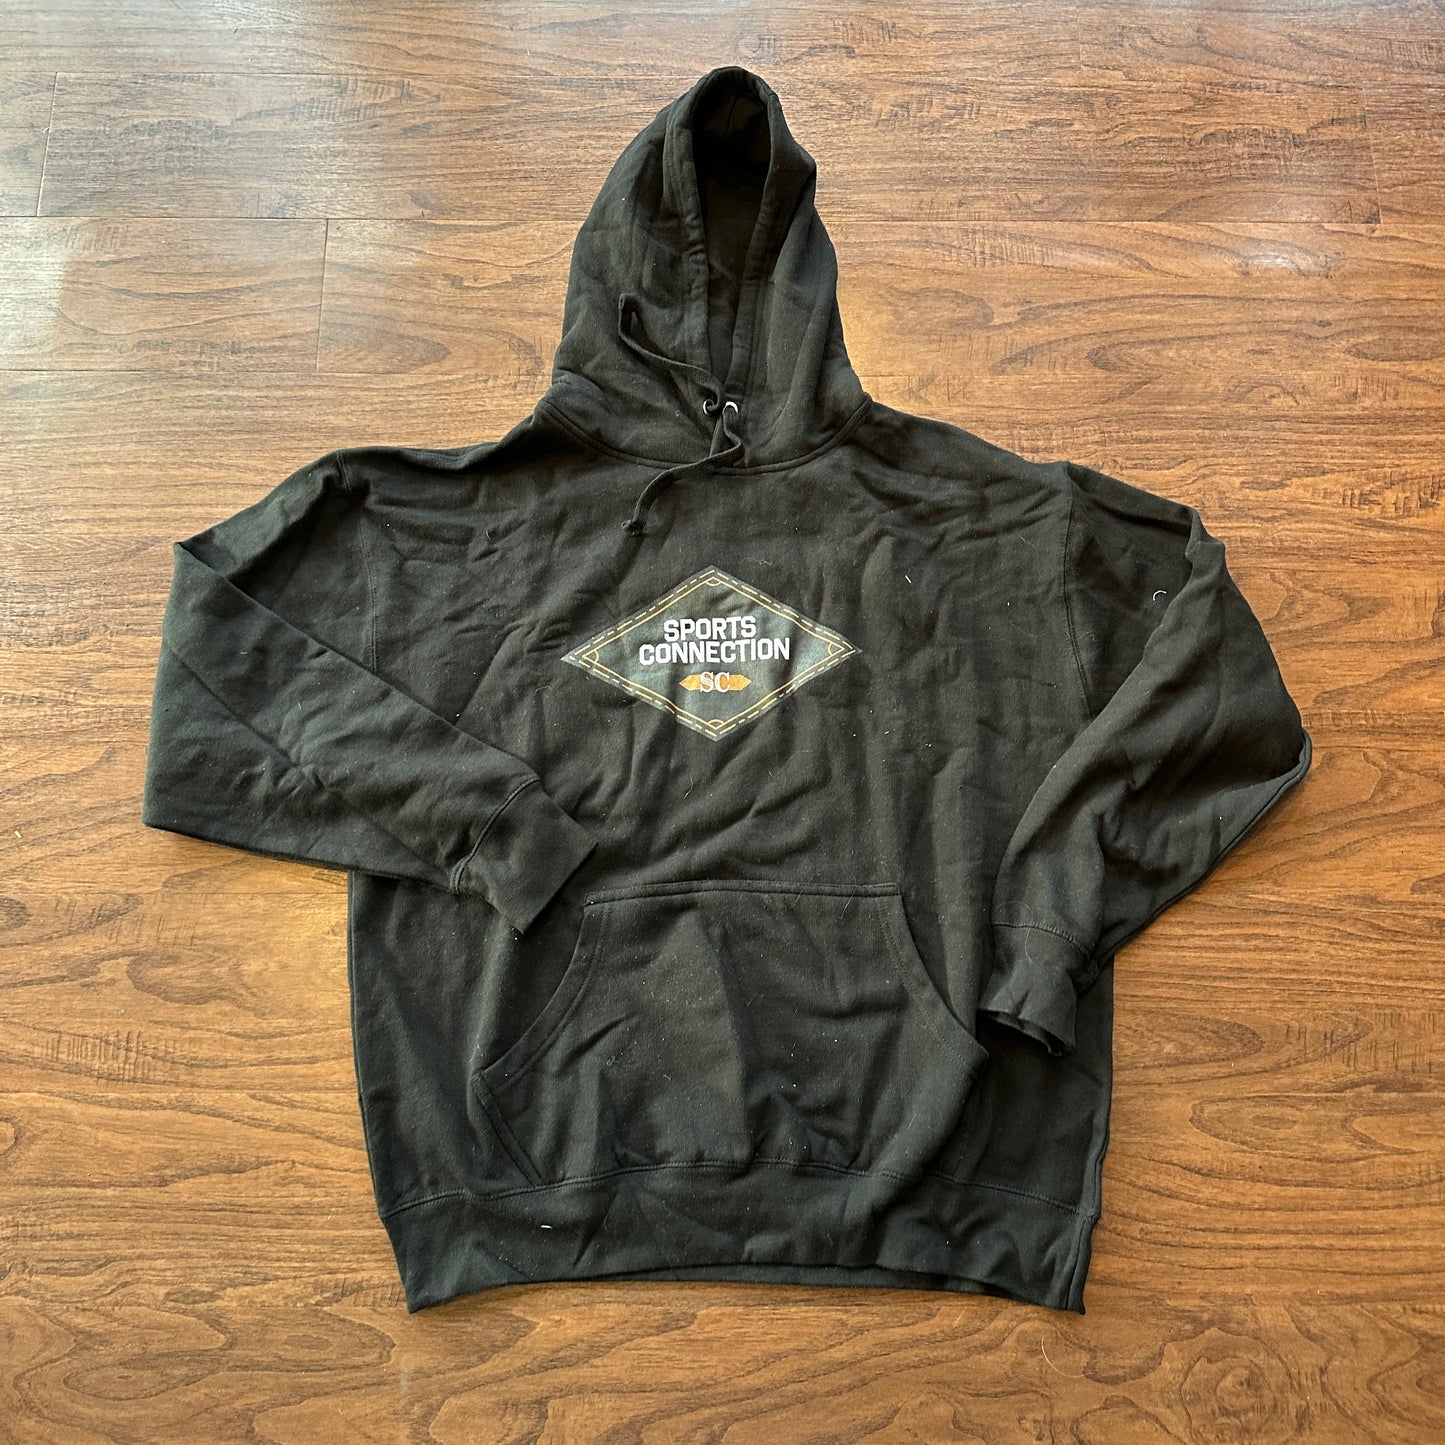 Sports Connection Merch Hoodie Black